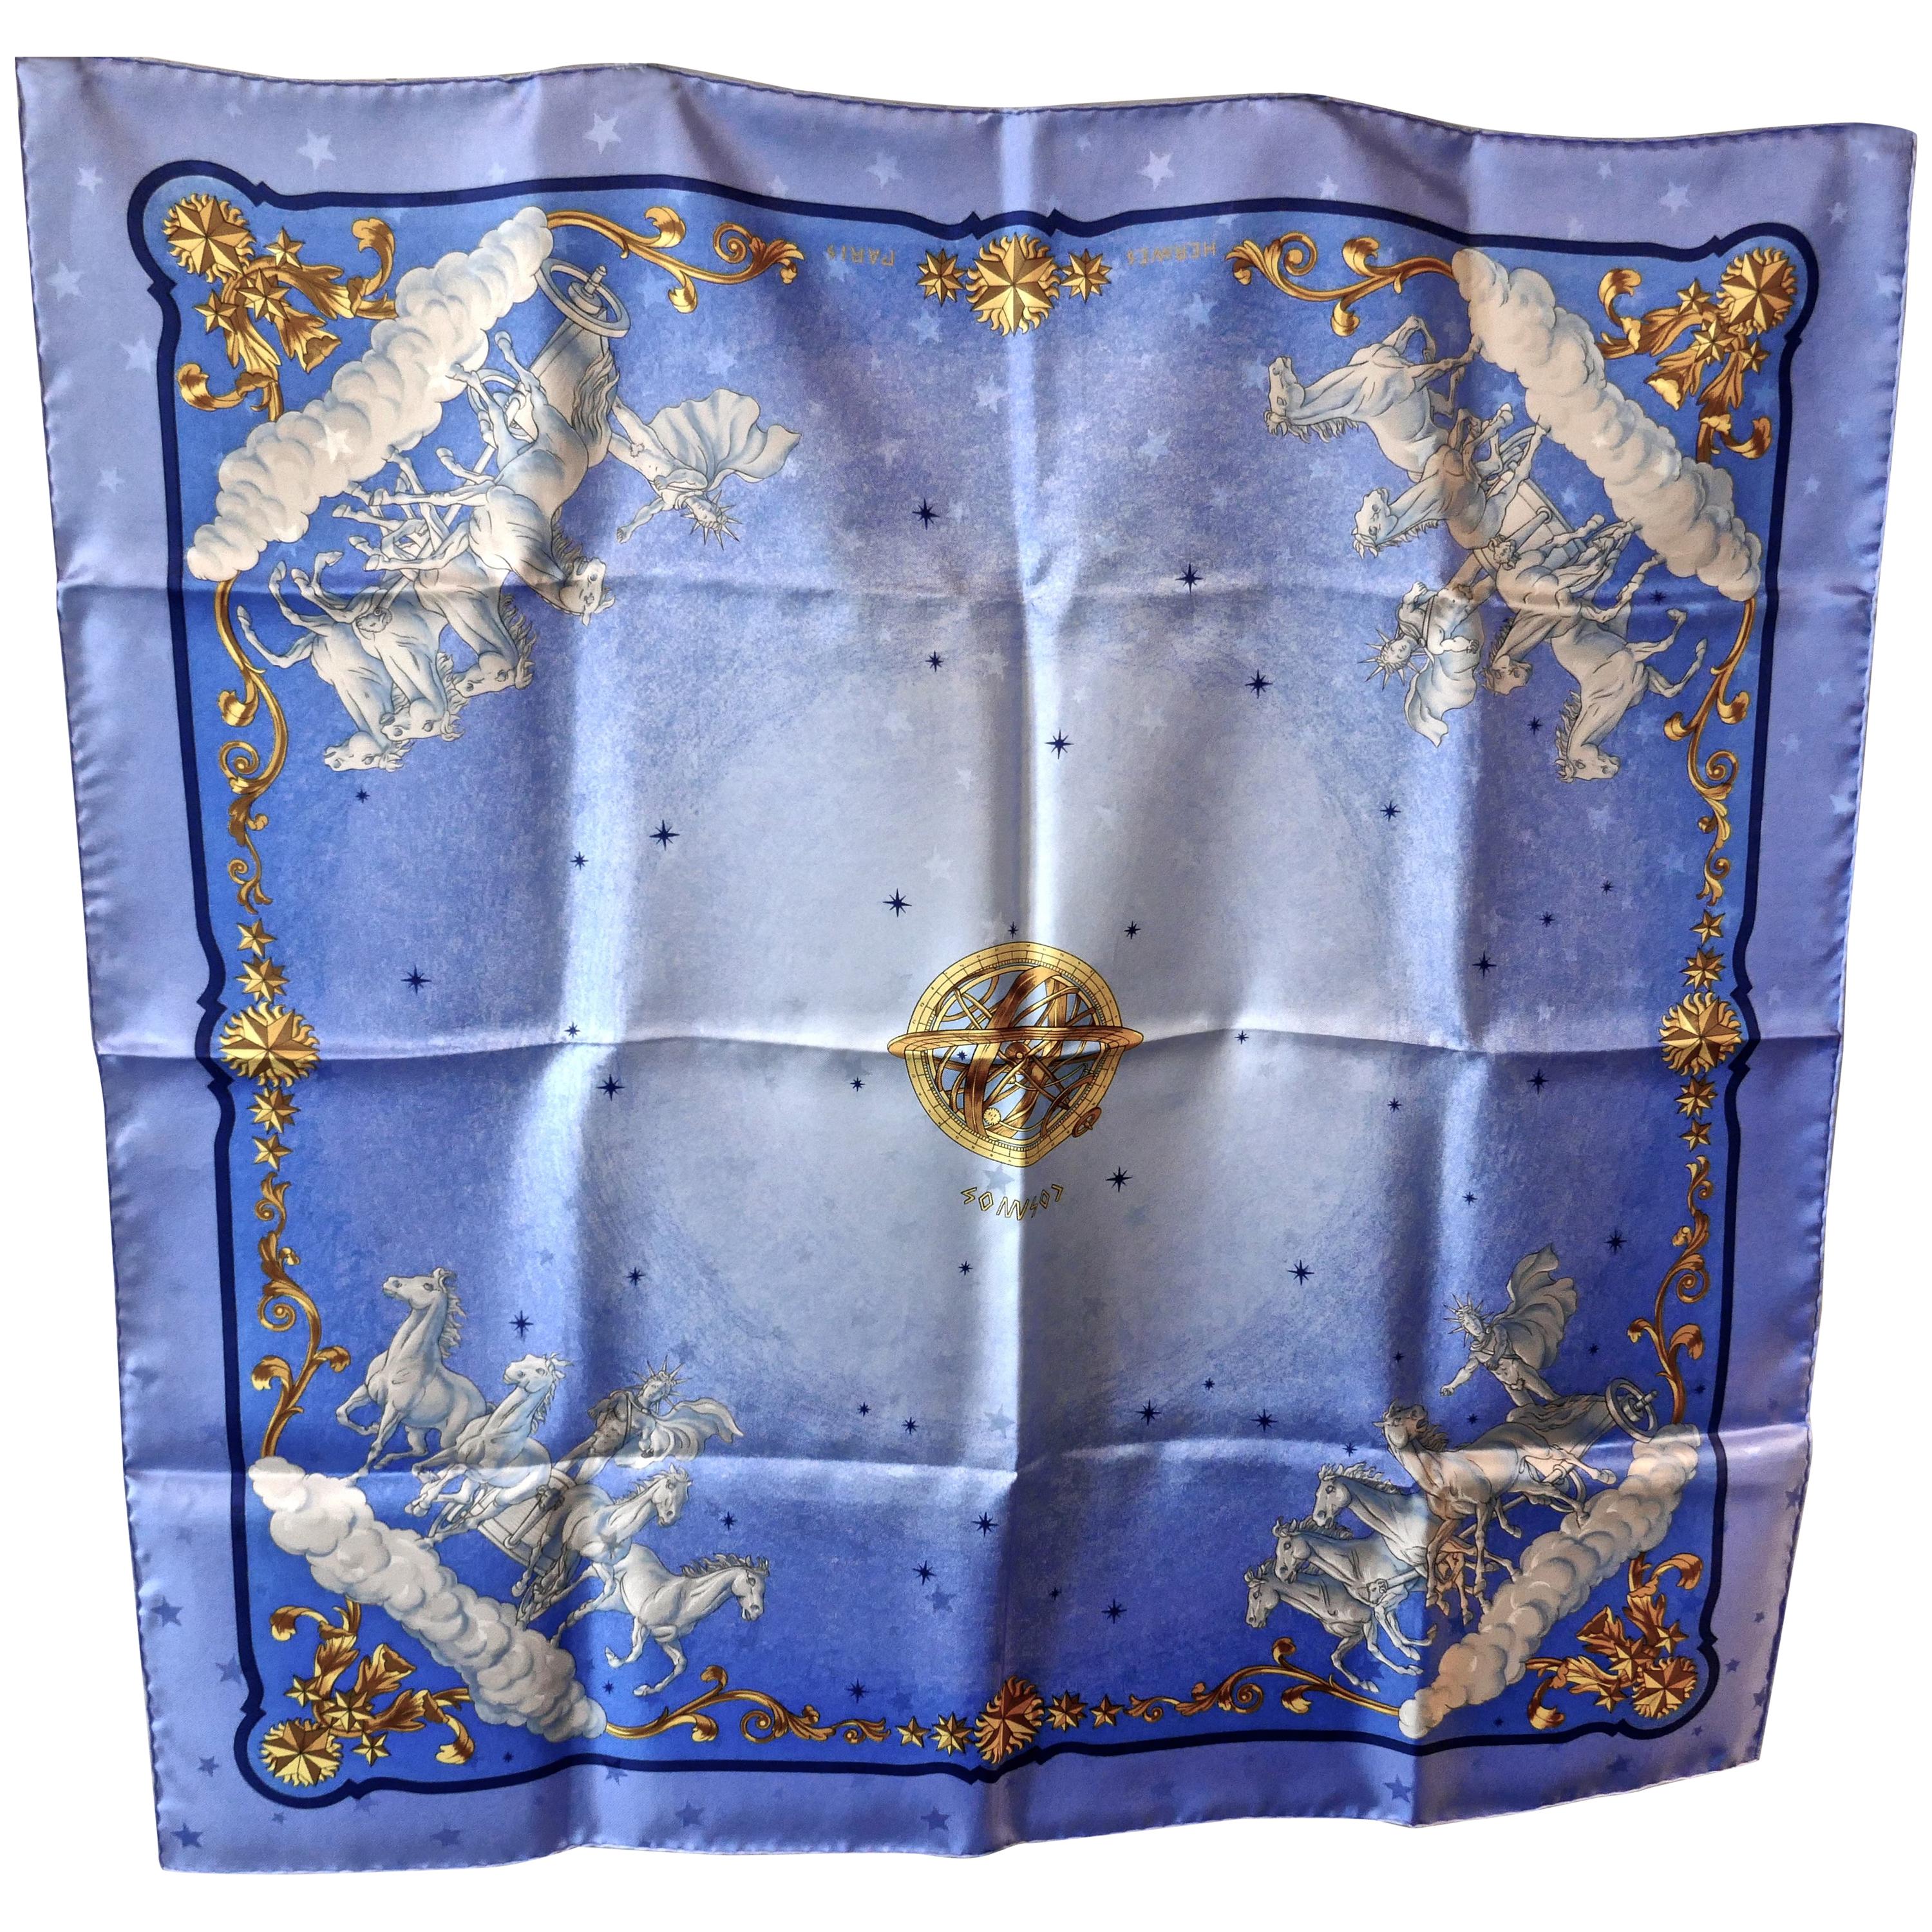 Hermès Scarf, in 100% Silk, Philippe Ledoux “Cosmos” in Blue, Gold and Bronze